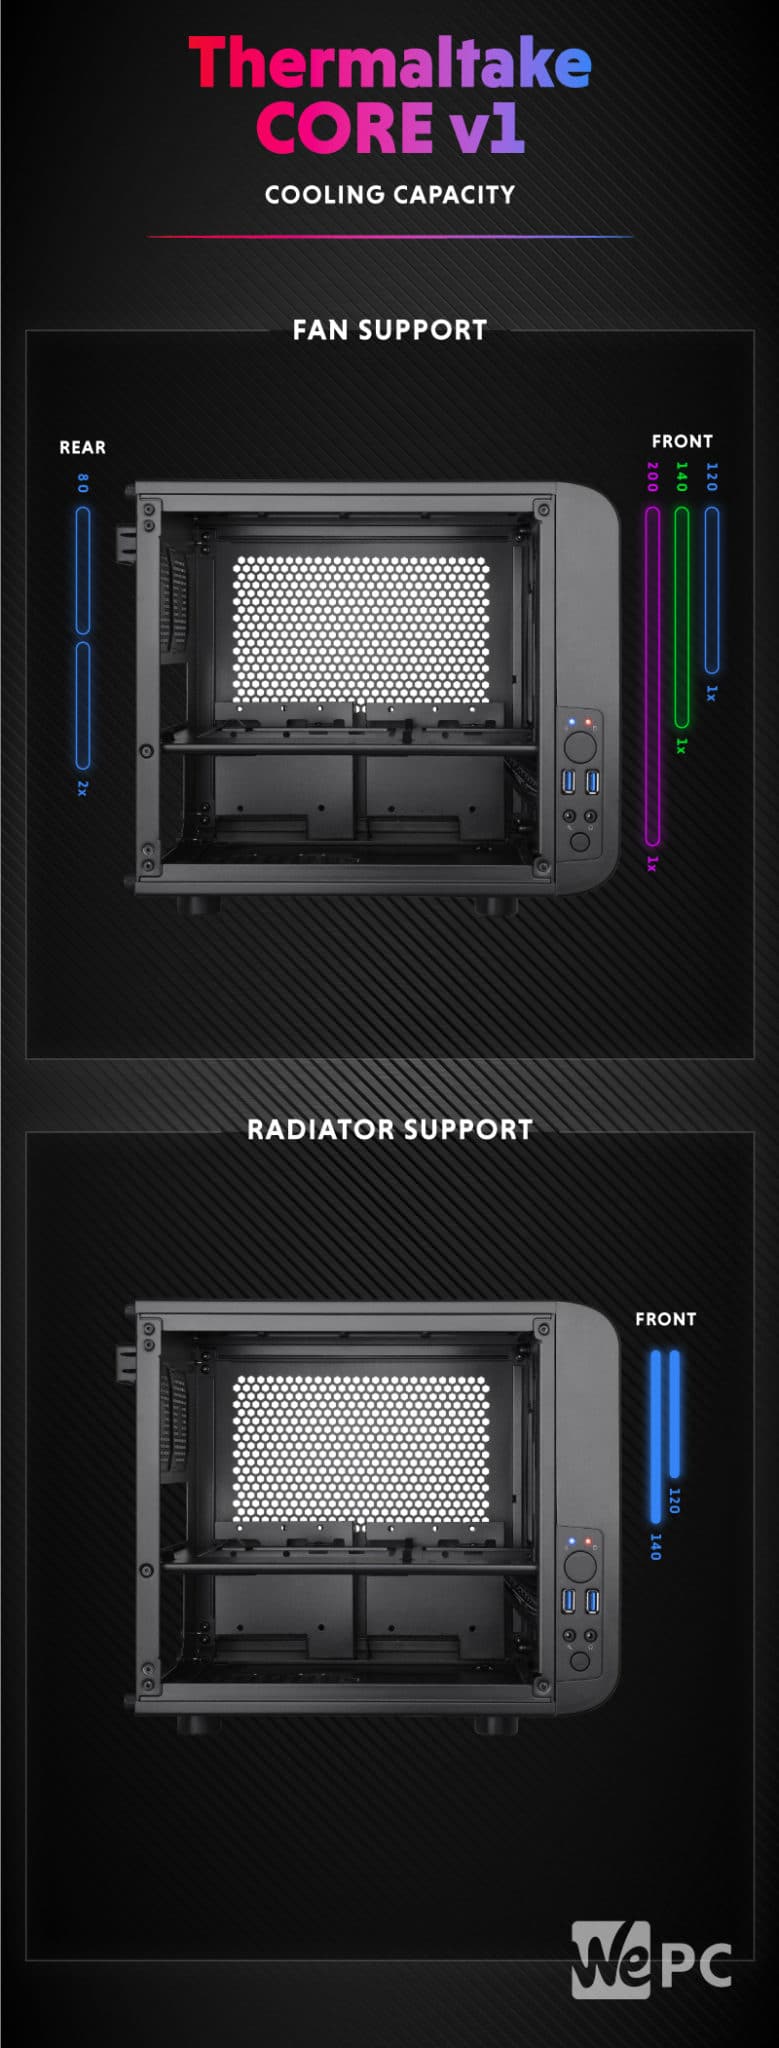 Thermaltake CORE v1 Cooling Capacity